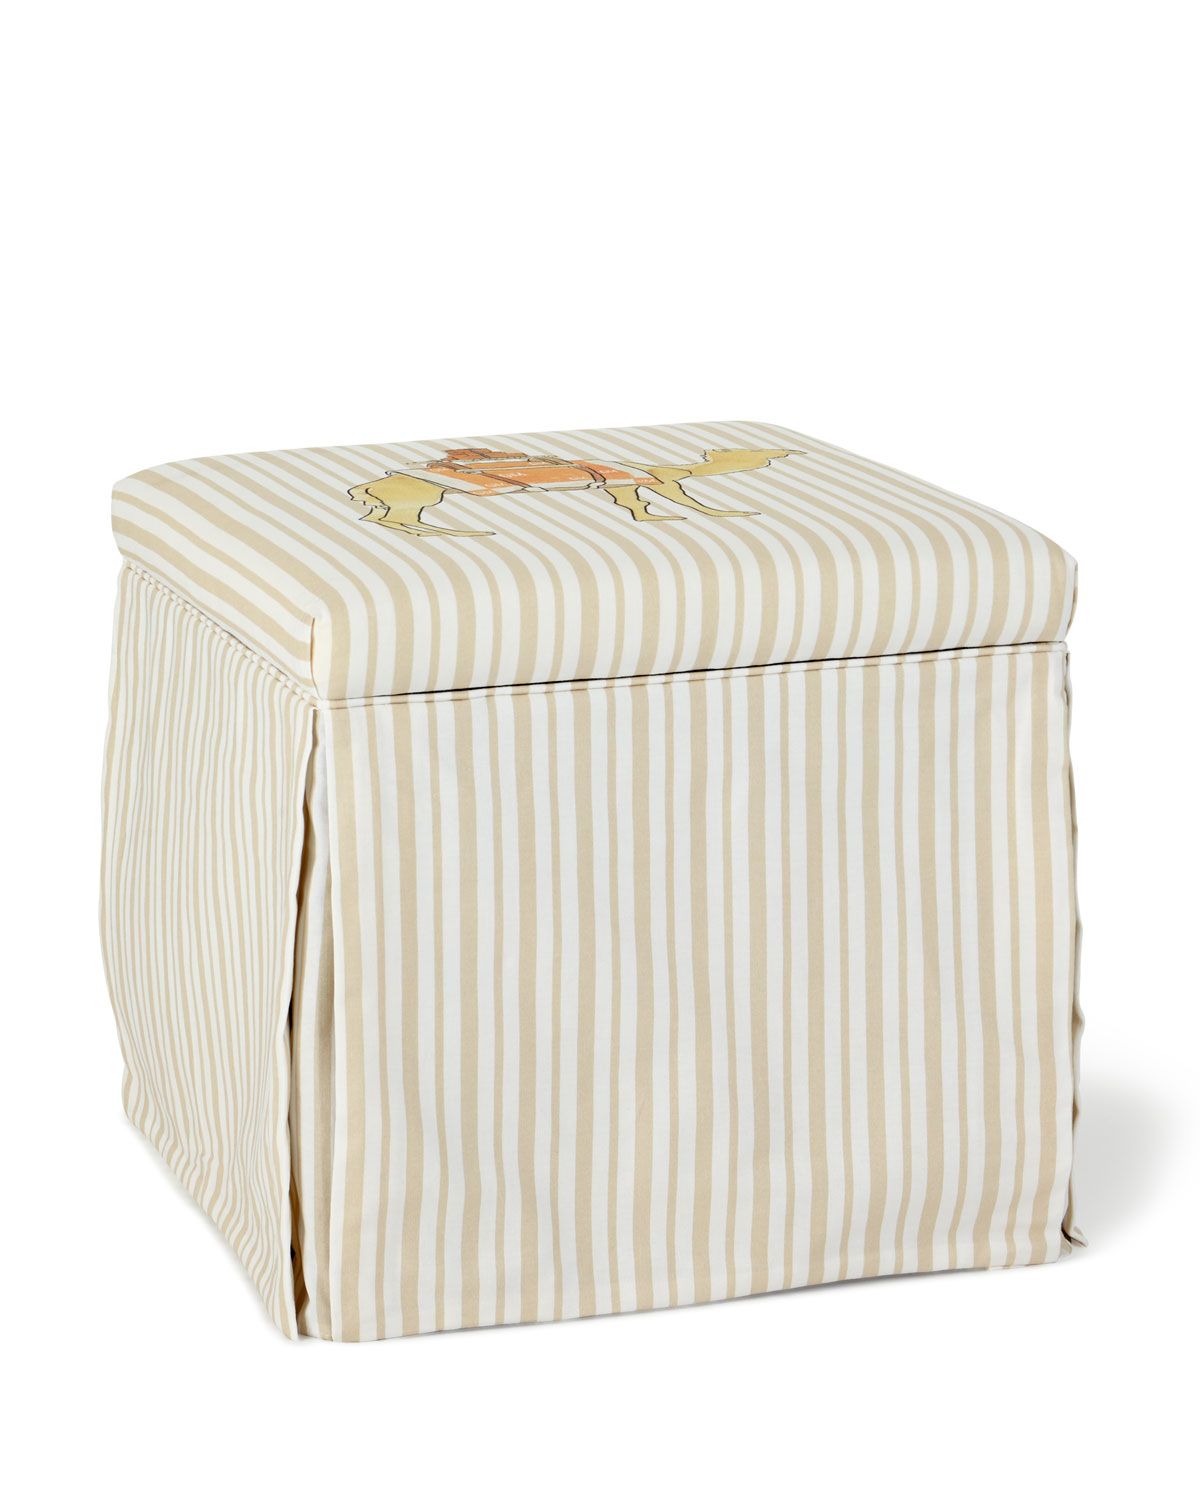 Cloth & Company X Gray Malin Camel Stripe Skirted Storage Ottoman For Gray Stripes Cylinder Pouf Ottomans (View 1 of 20)